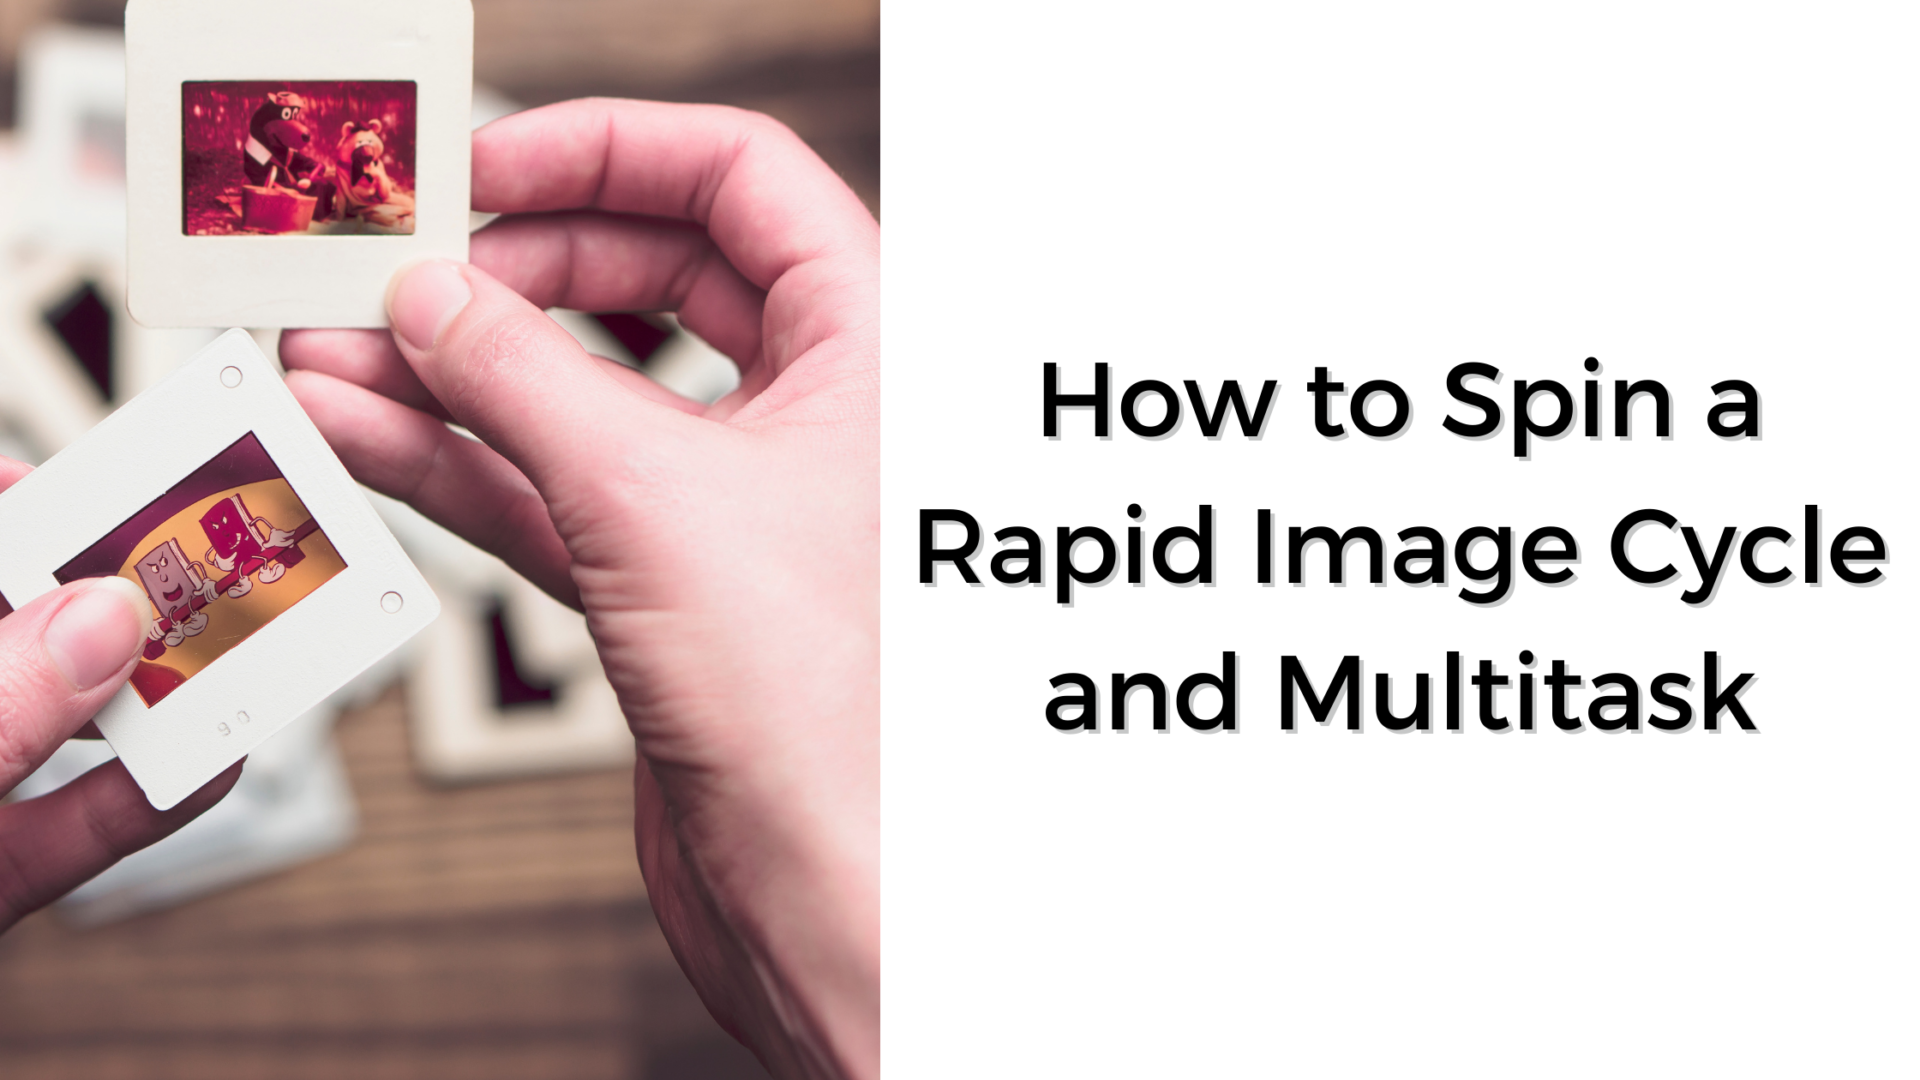 Spacing Out While Doing Rapid Image Cycling